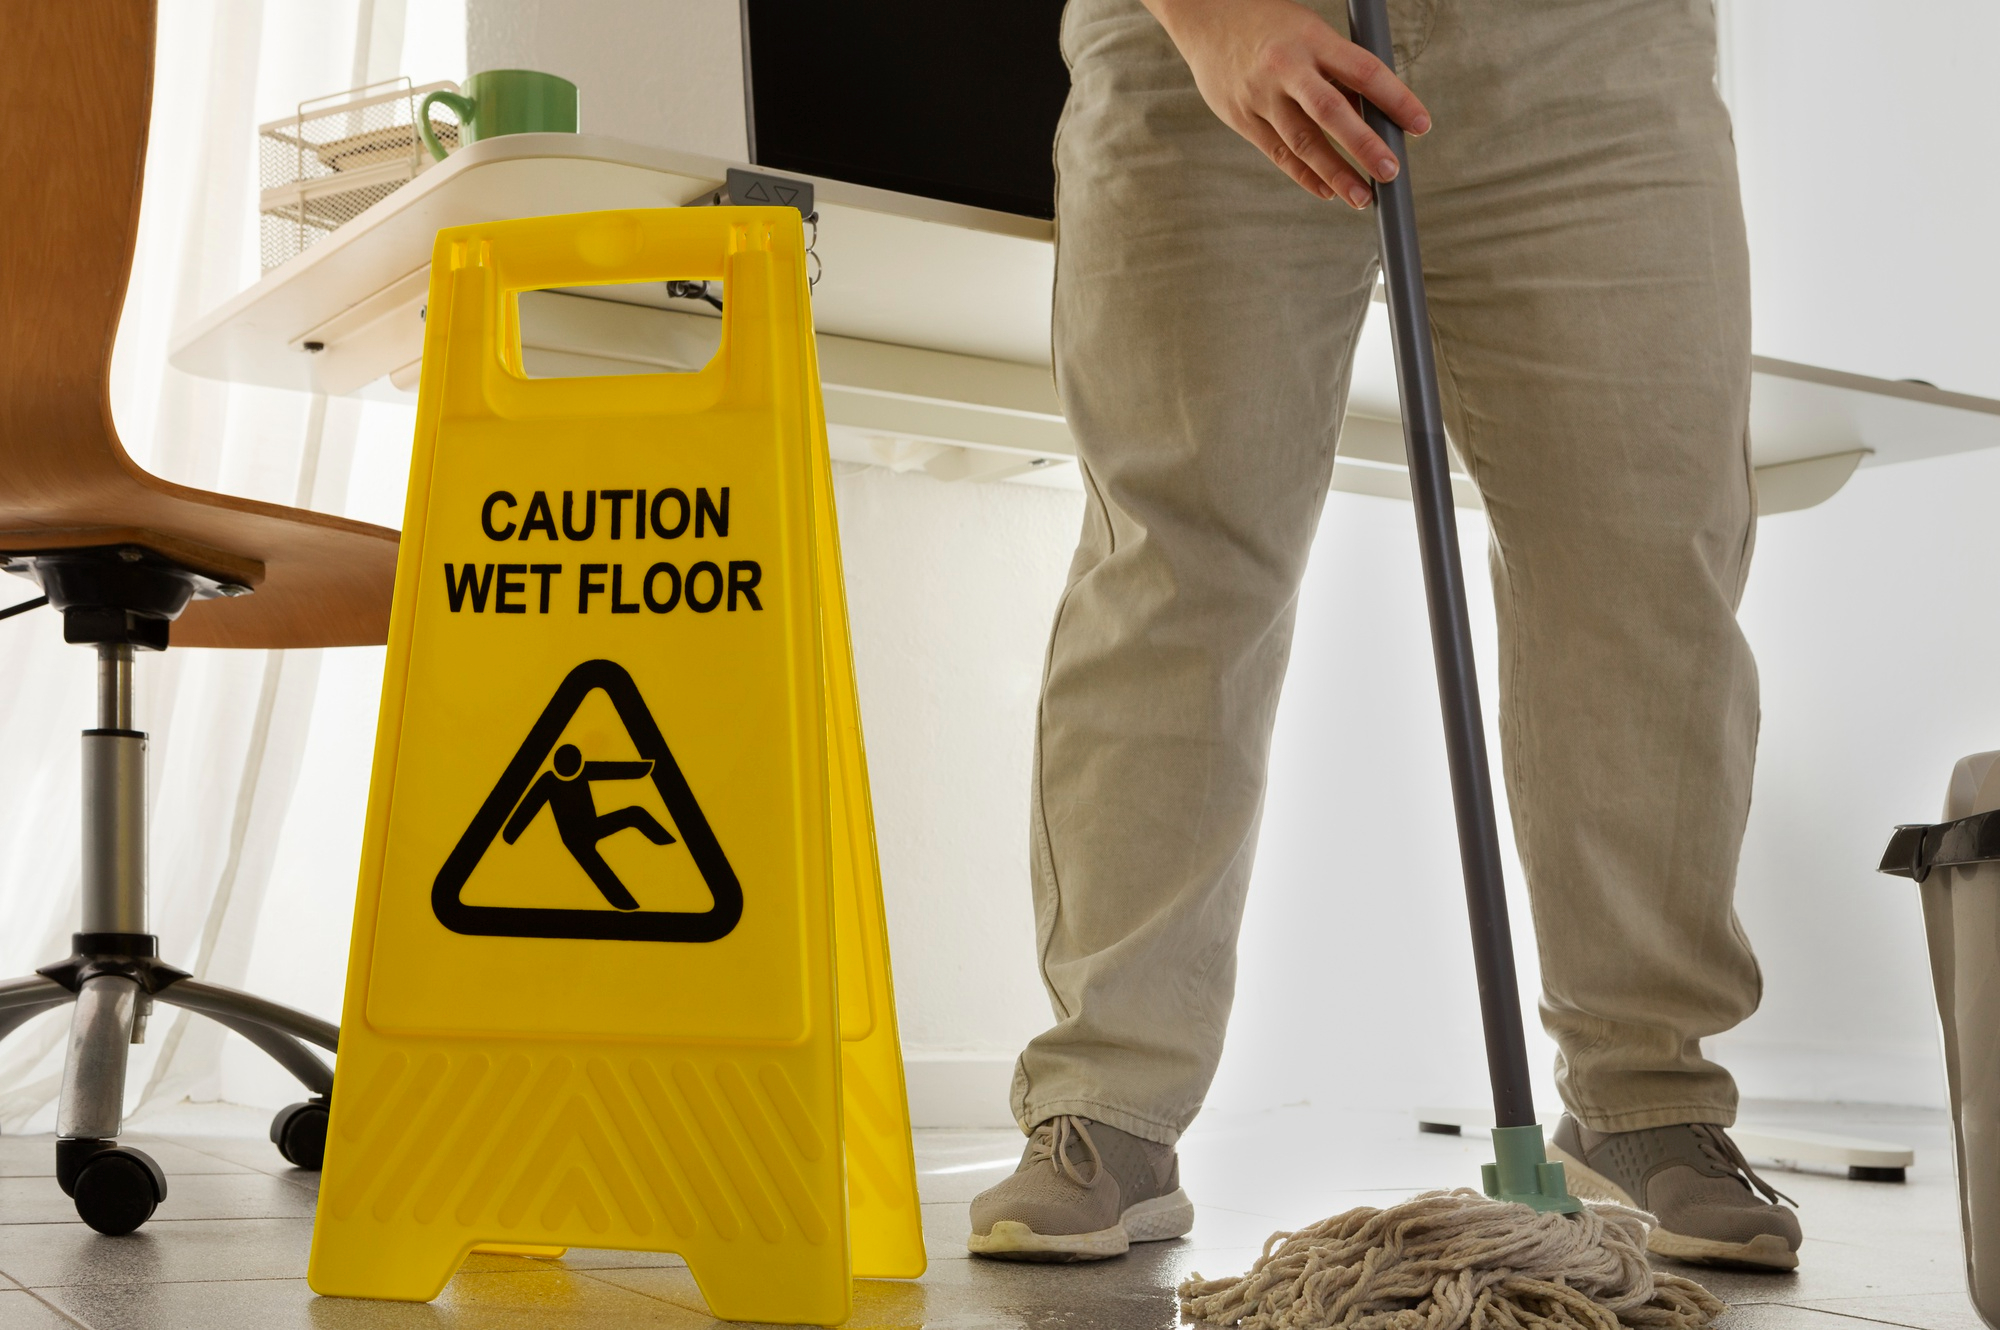 A janitor stands in an office room mopping the floor. A "Caution: Wet Floor" sign is placed next to him.